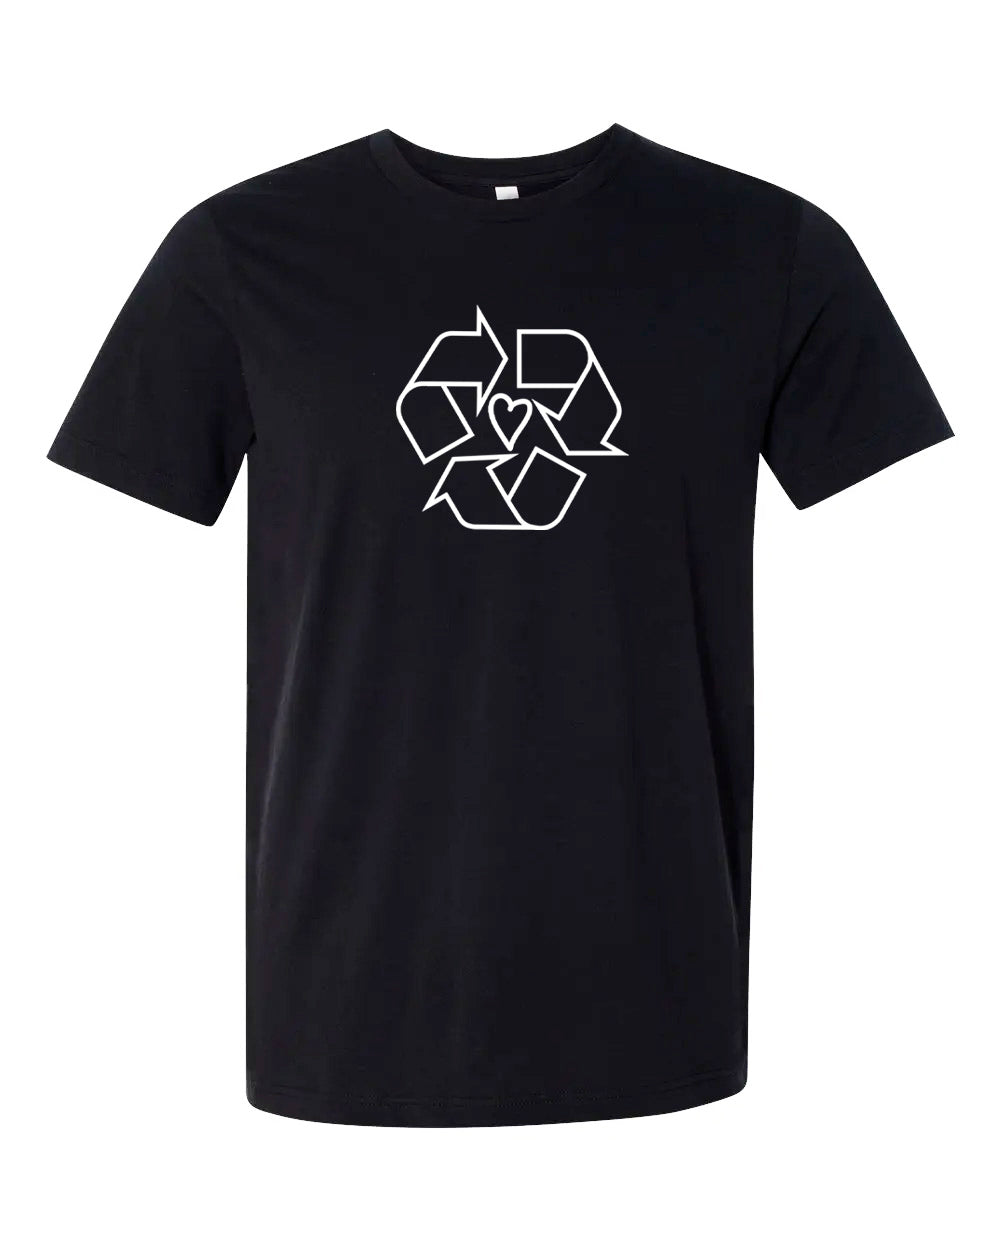 REUSE REDUCE T-Shirts | Unsettled Apparel